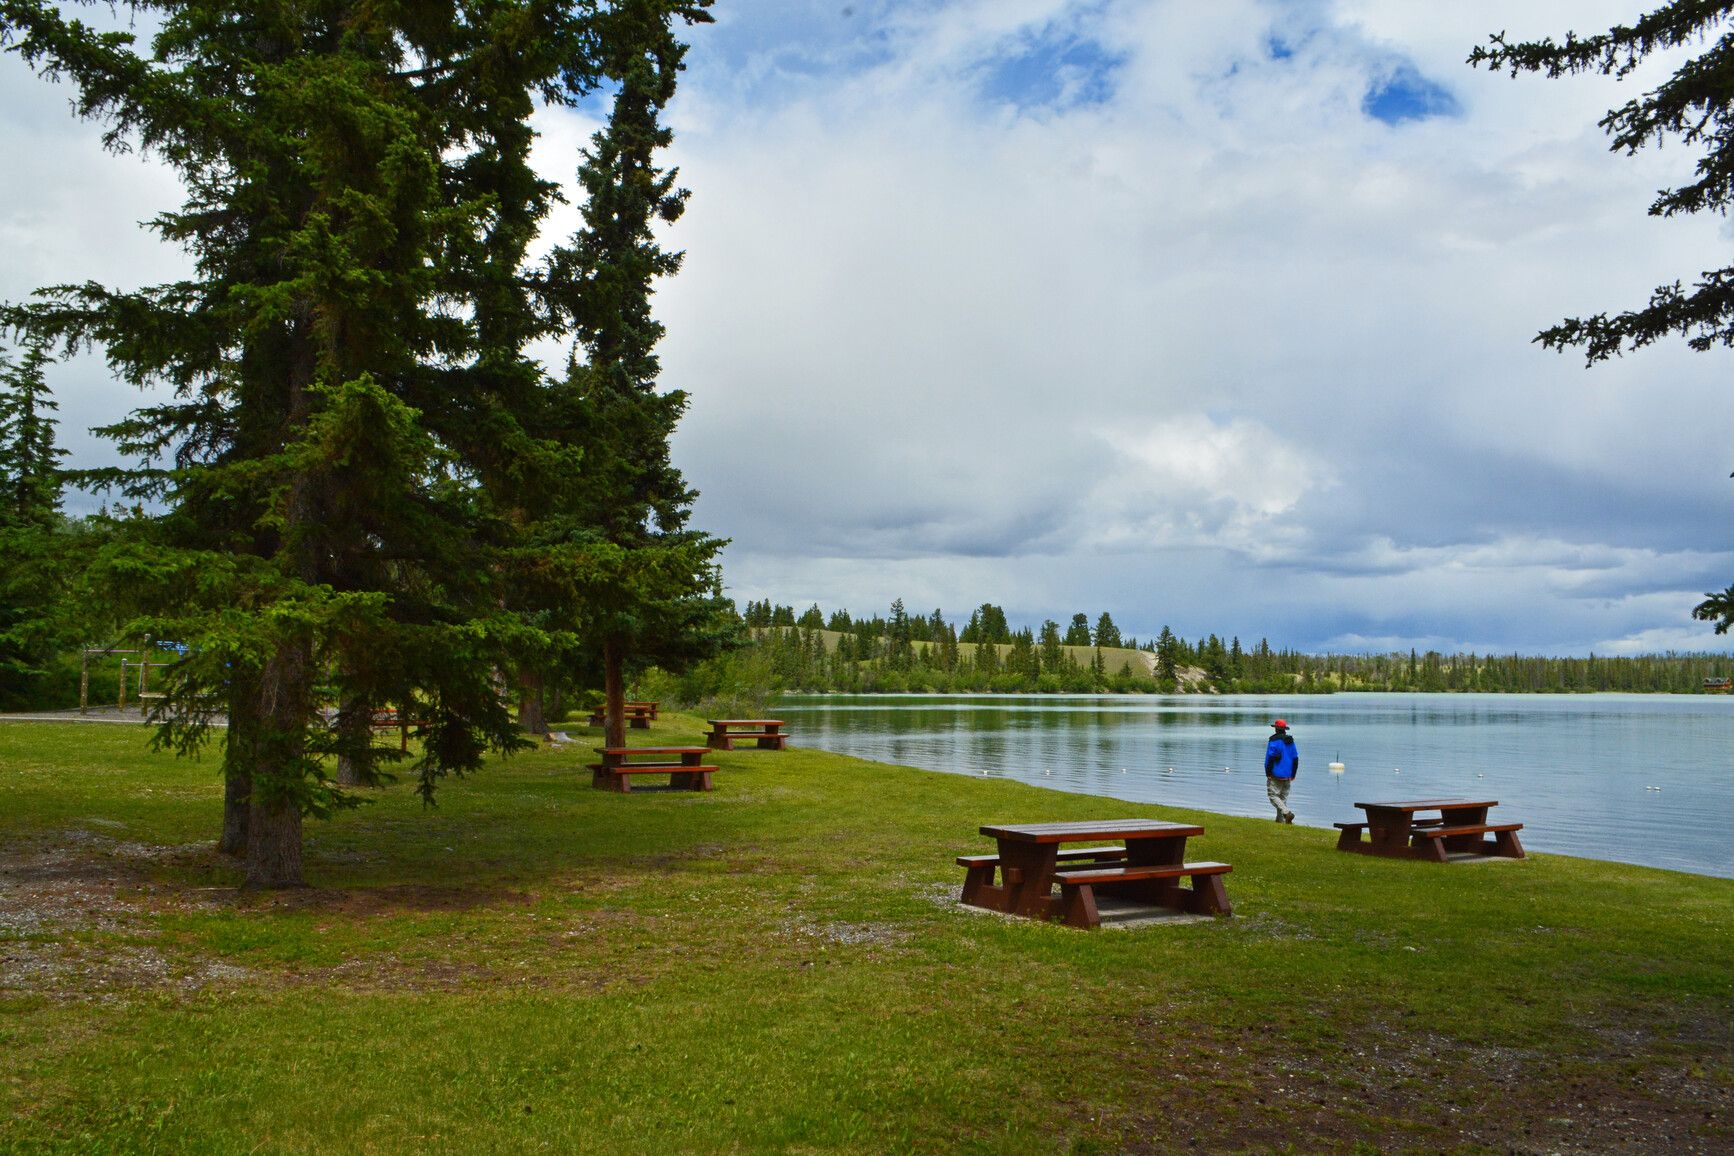 A park visitor walks the shore of Big Bar Lake near the day-use area.